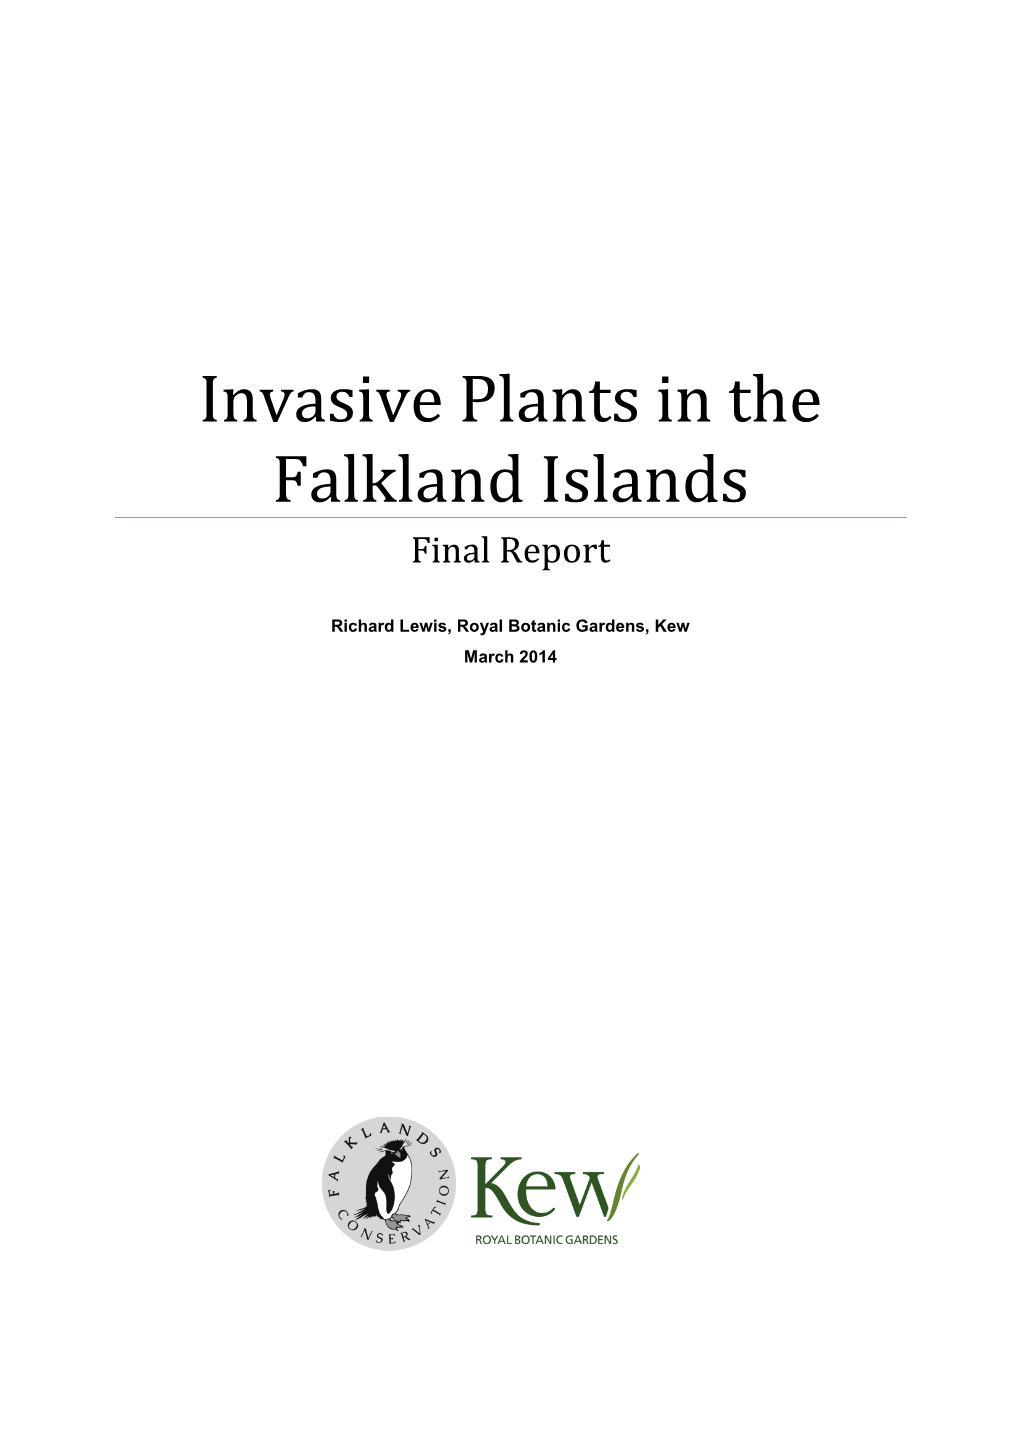 Invasive Plants in the Falkland Islands Final Report